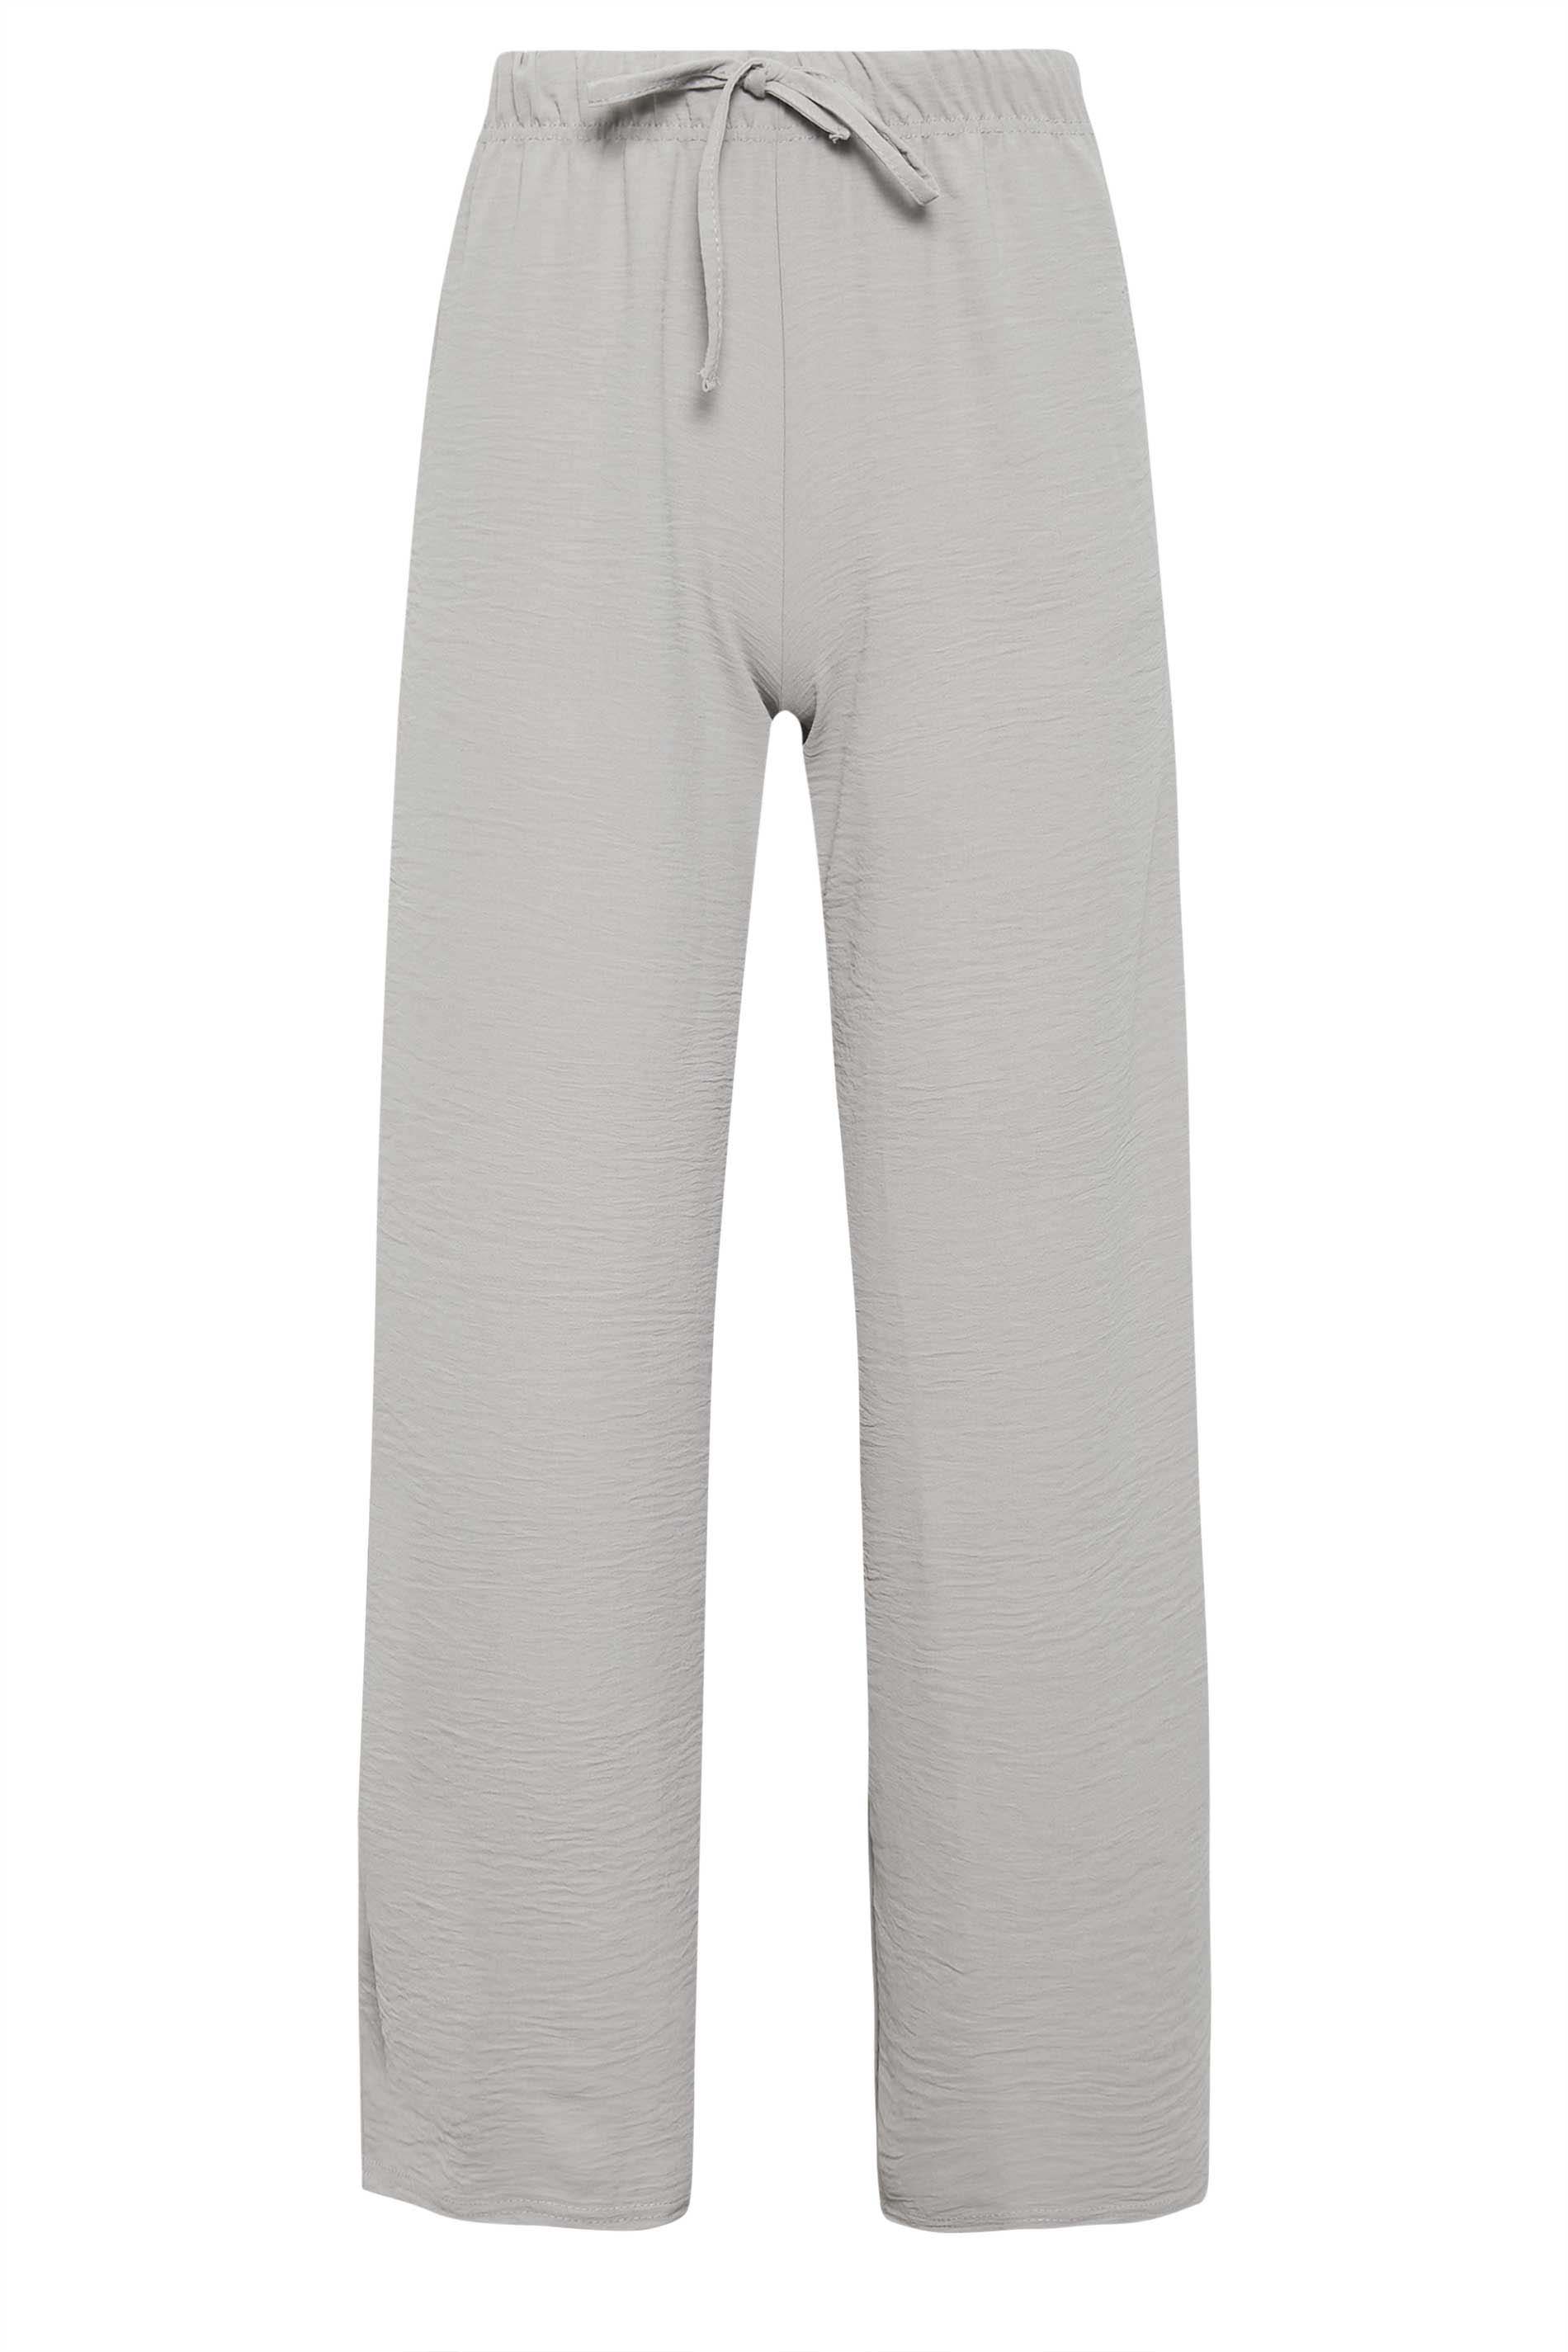 Petite Trousers for Women | Whistles |